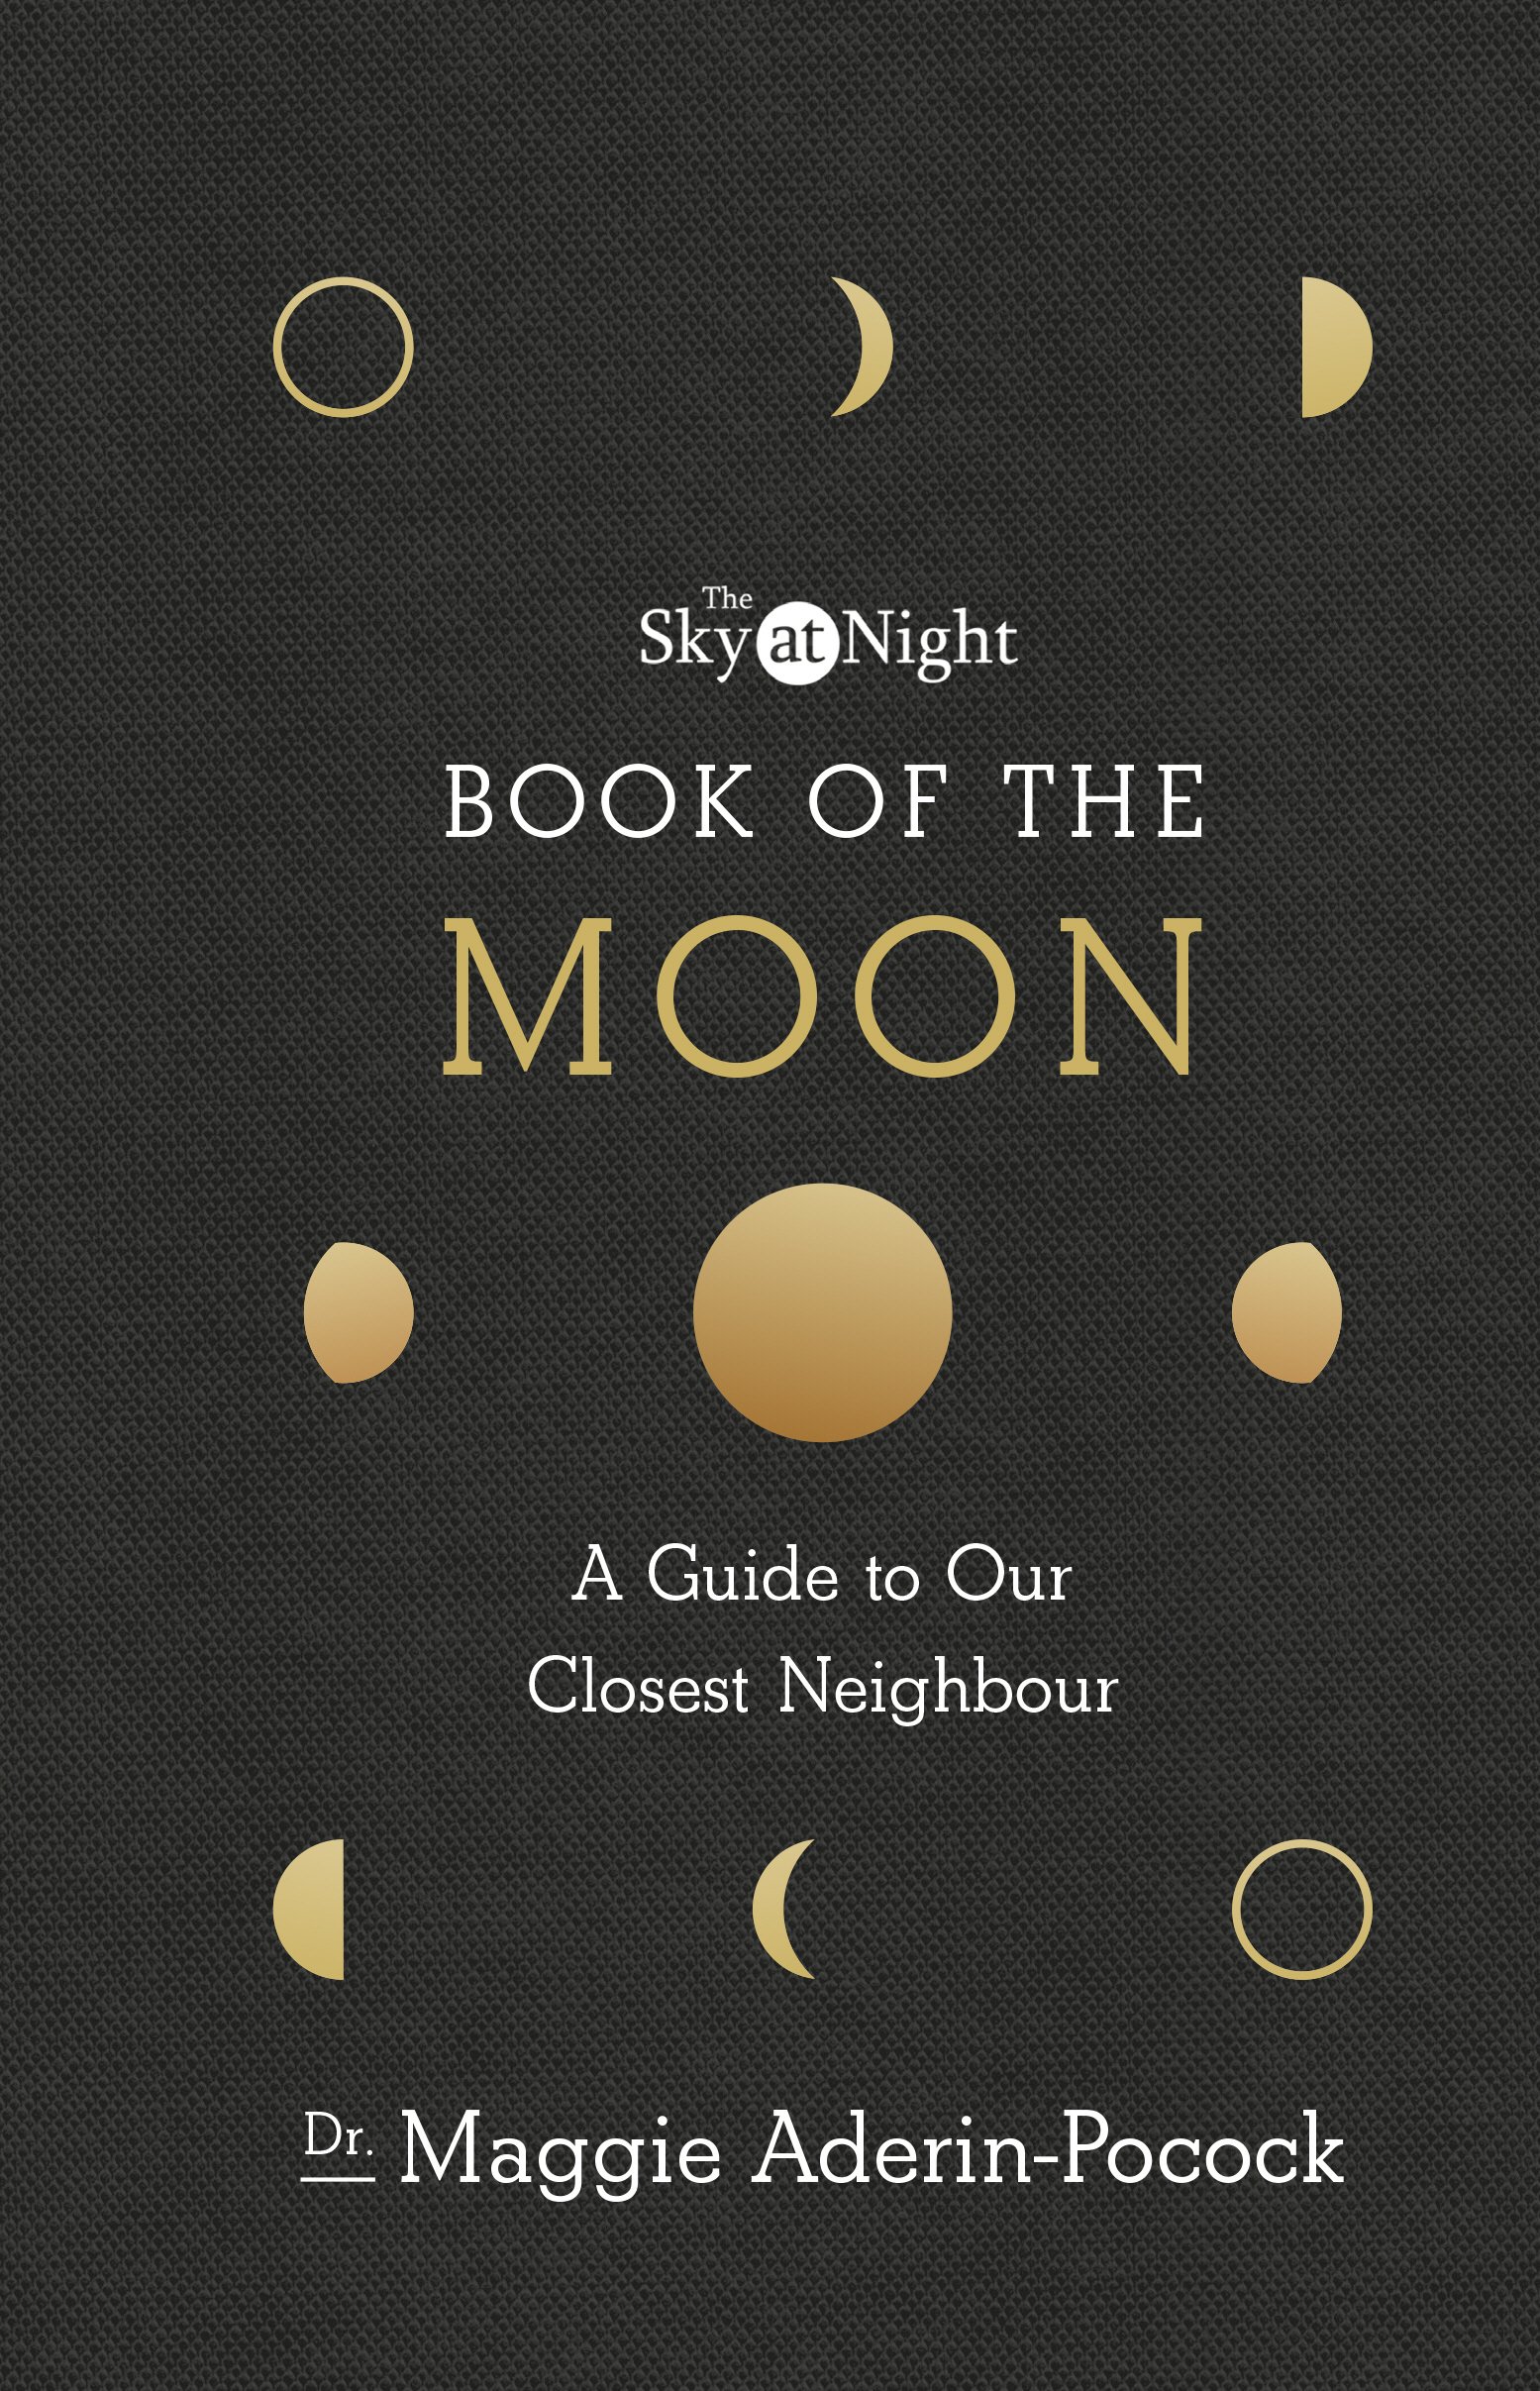 he Sky at Night: Book of the Moon – A Guide to Our Closest Neighbour